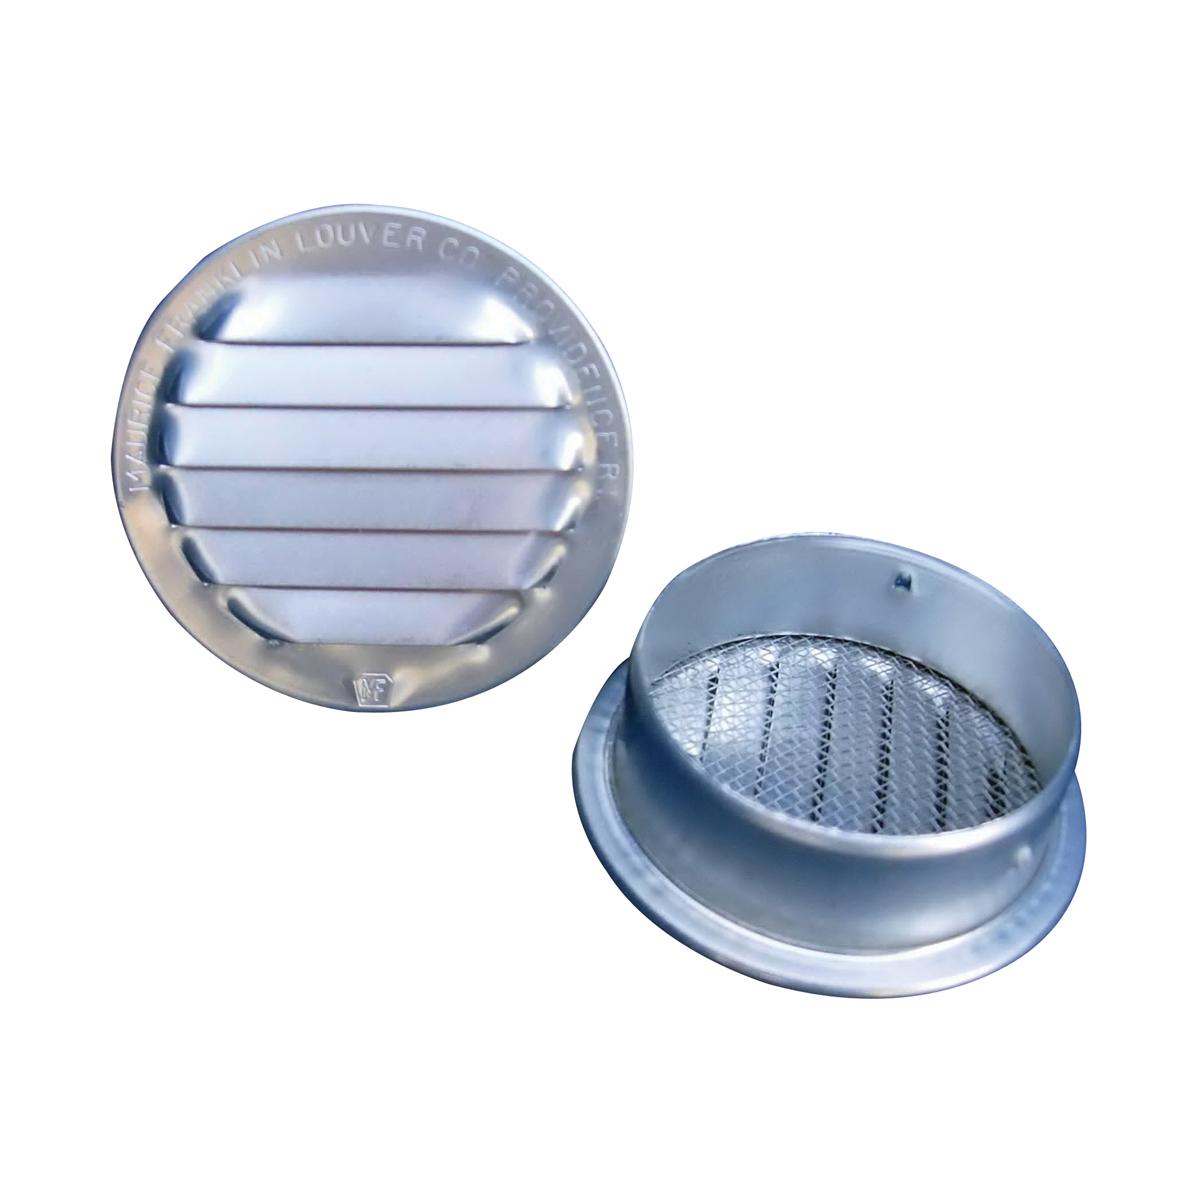 RL-100 4 Mini Louver with Insect Screen, 4-5/8 in W, Round, Aluminum, Mill